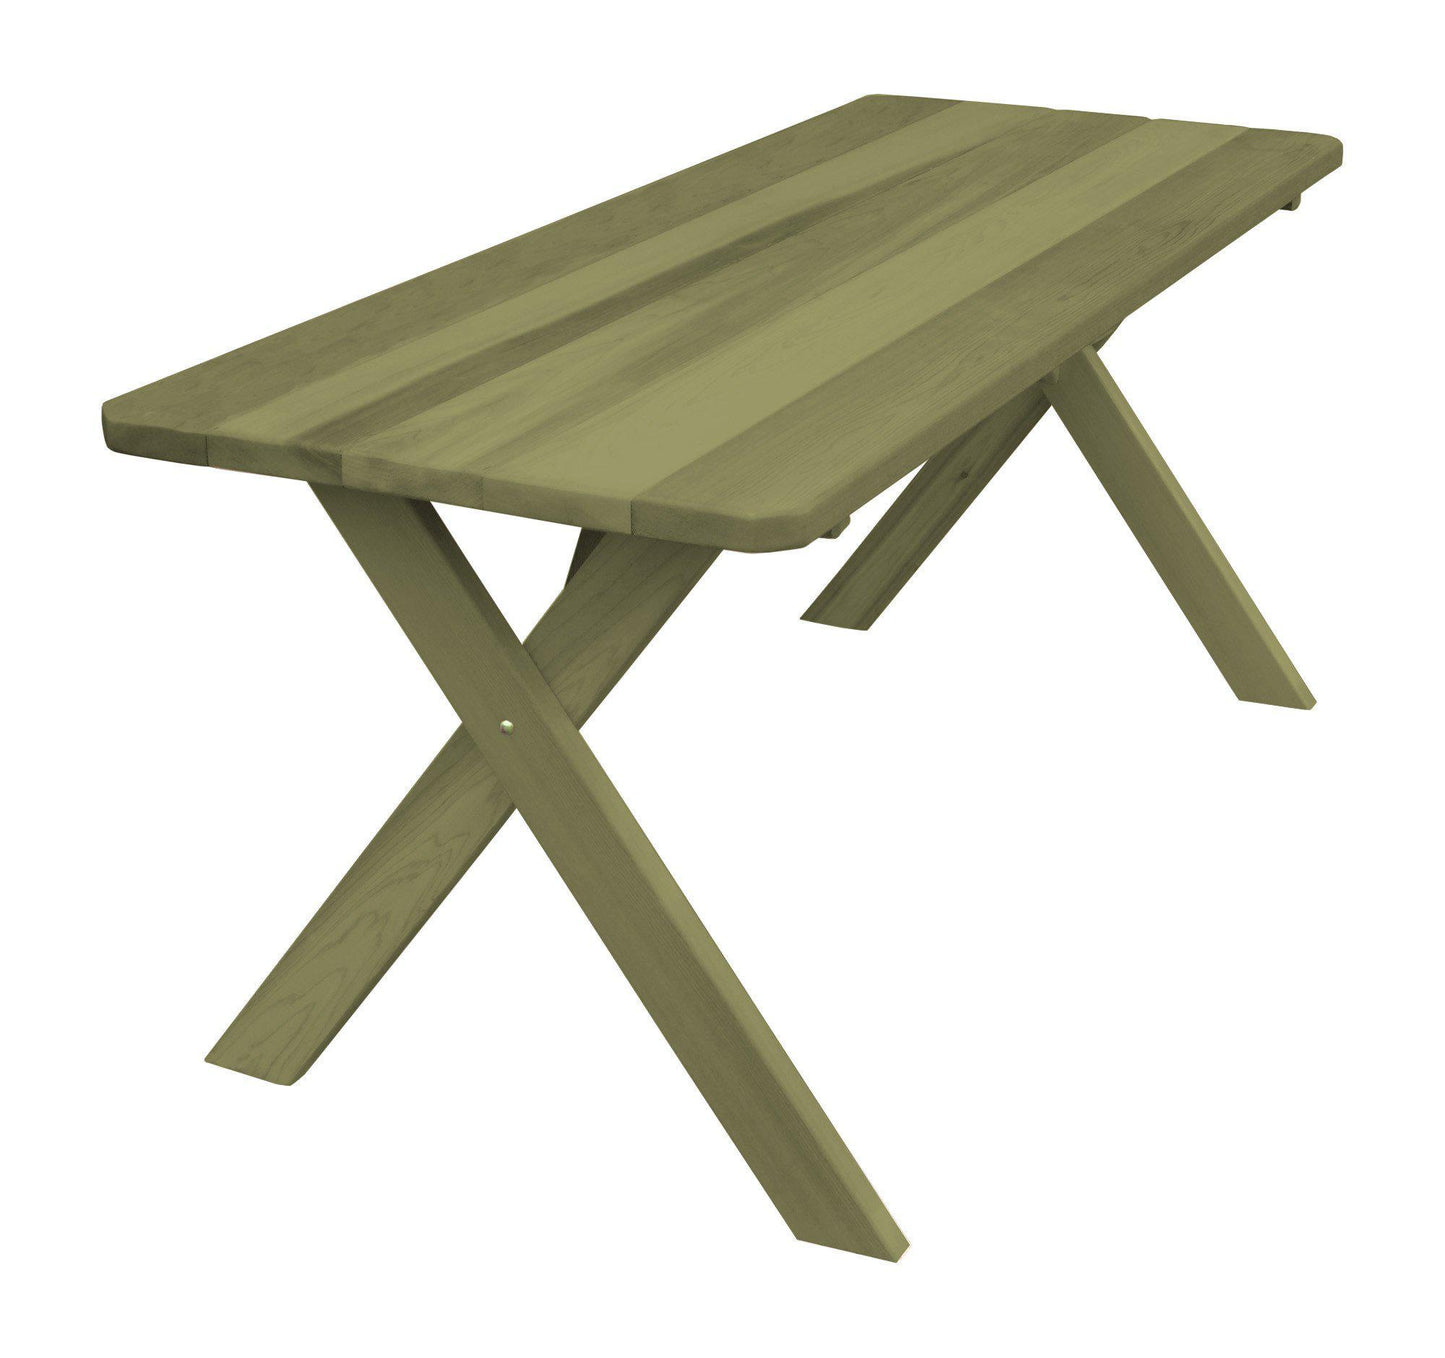 A&L FURNITURE CO. Western Red Cedar 70" Cross-leg Table Only - Specify for FREE 2" Umbrella Hole - LEAD TIME TO SHIP 2 WEEKS